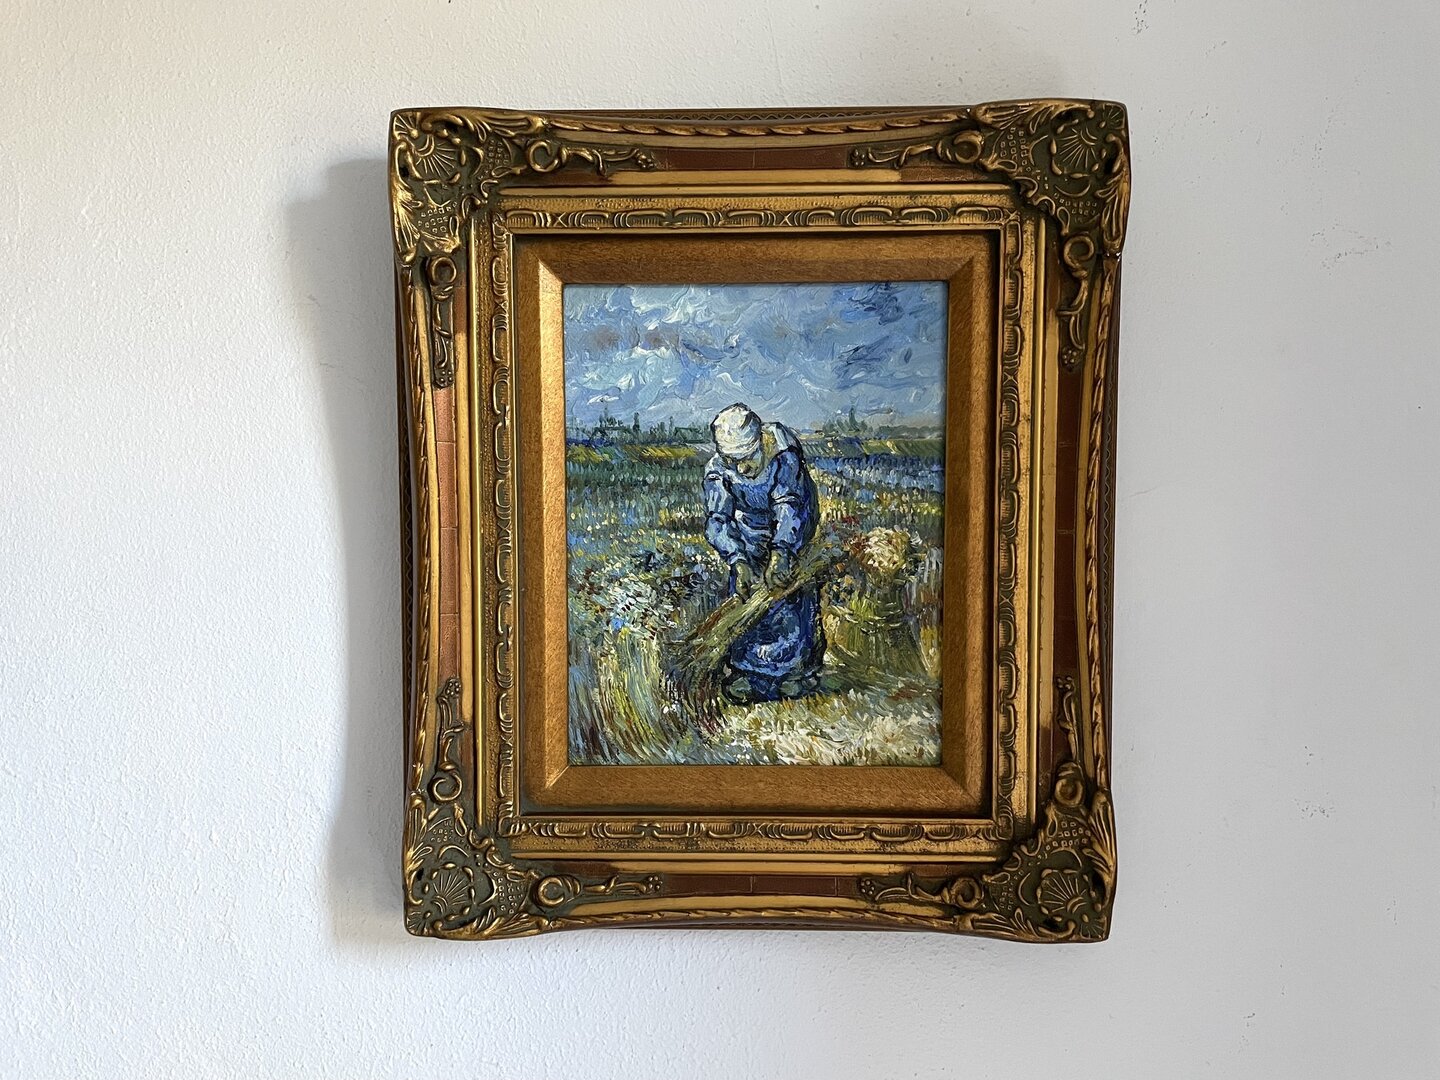 small replica of Van Gogh's Peasant Woman binding Sheaves with vintage frame